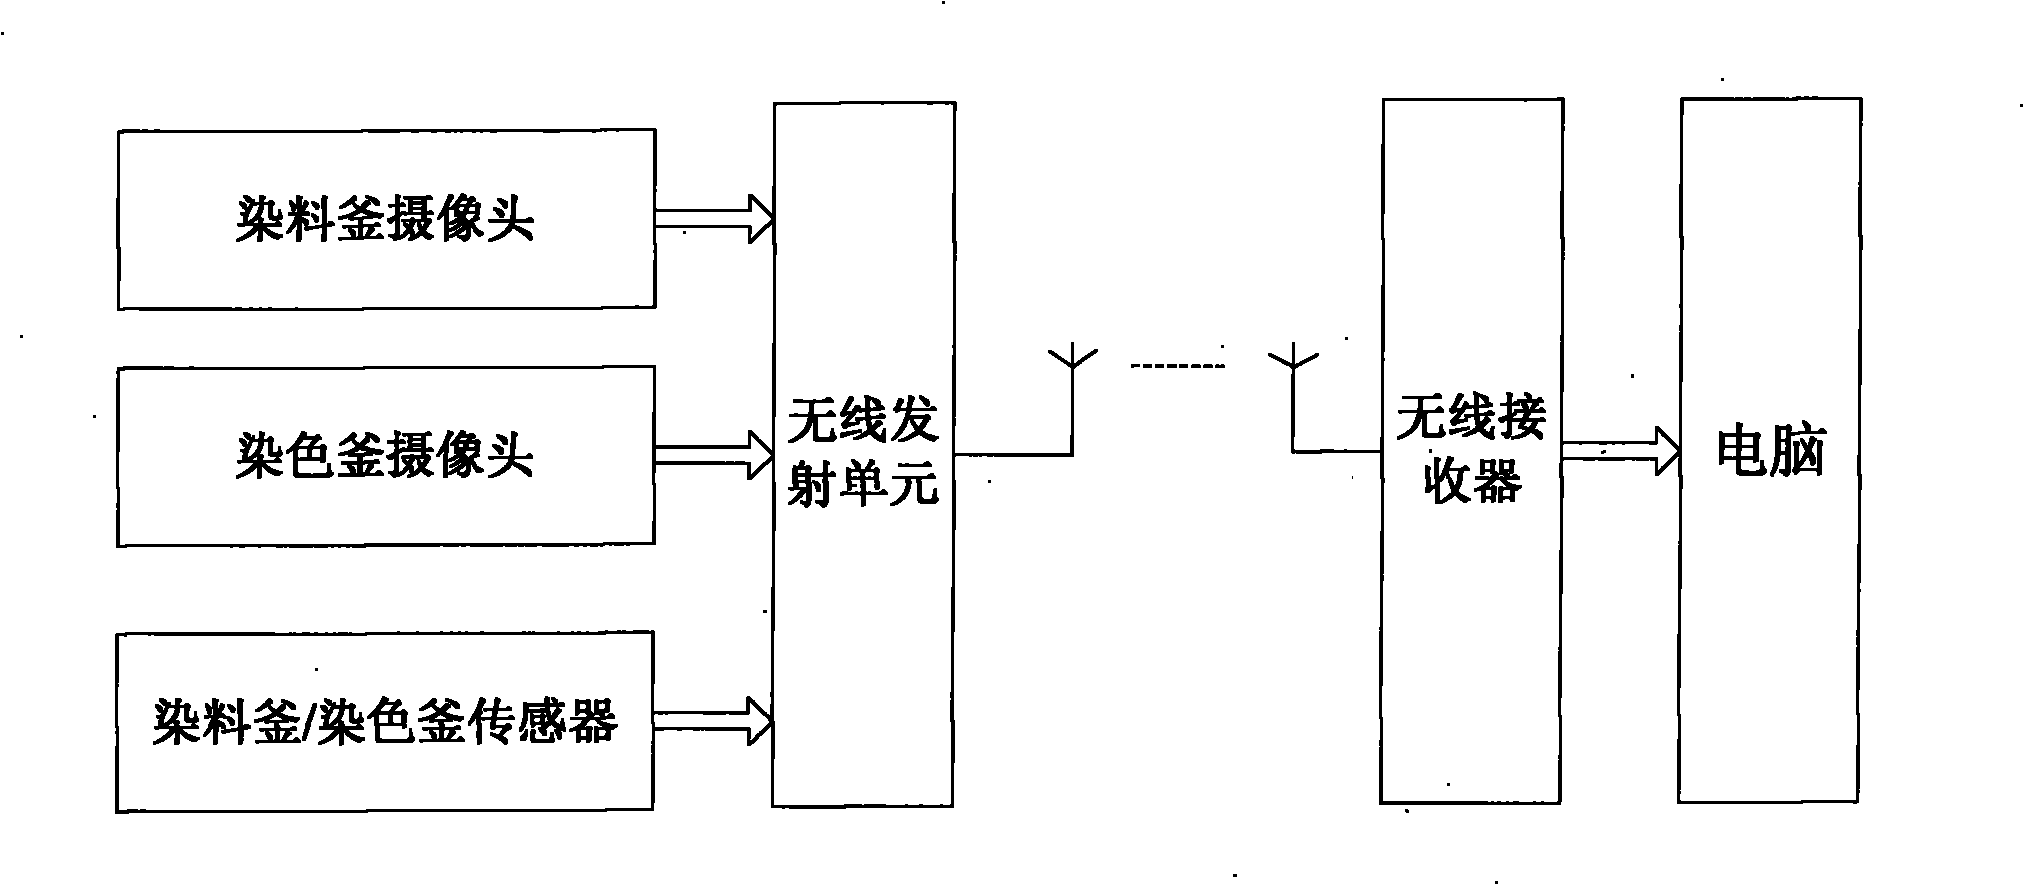 Visualization system in supercritical carbon dioxide dyeing device